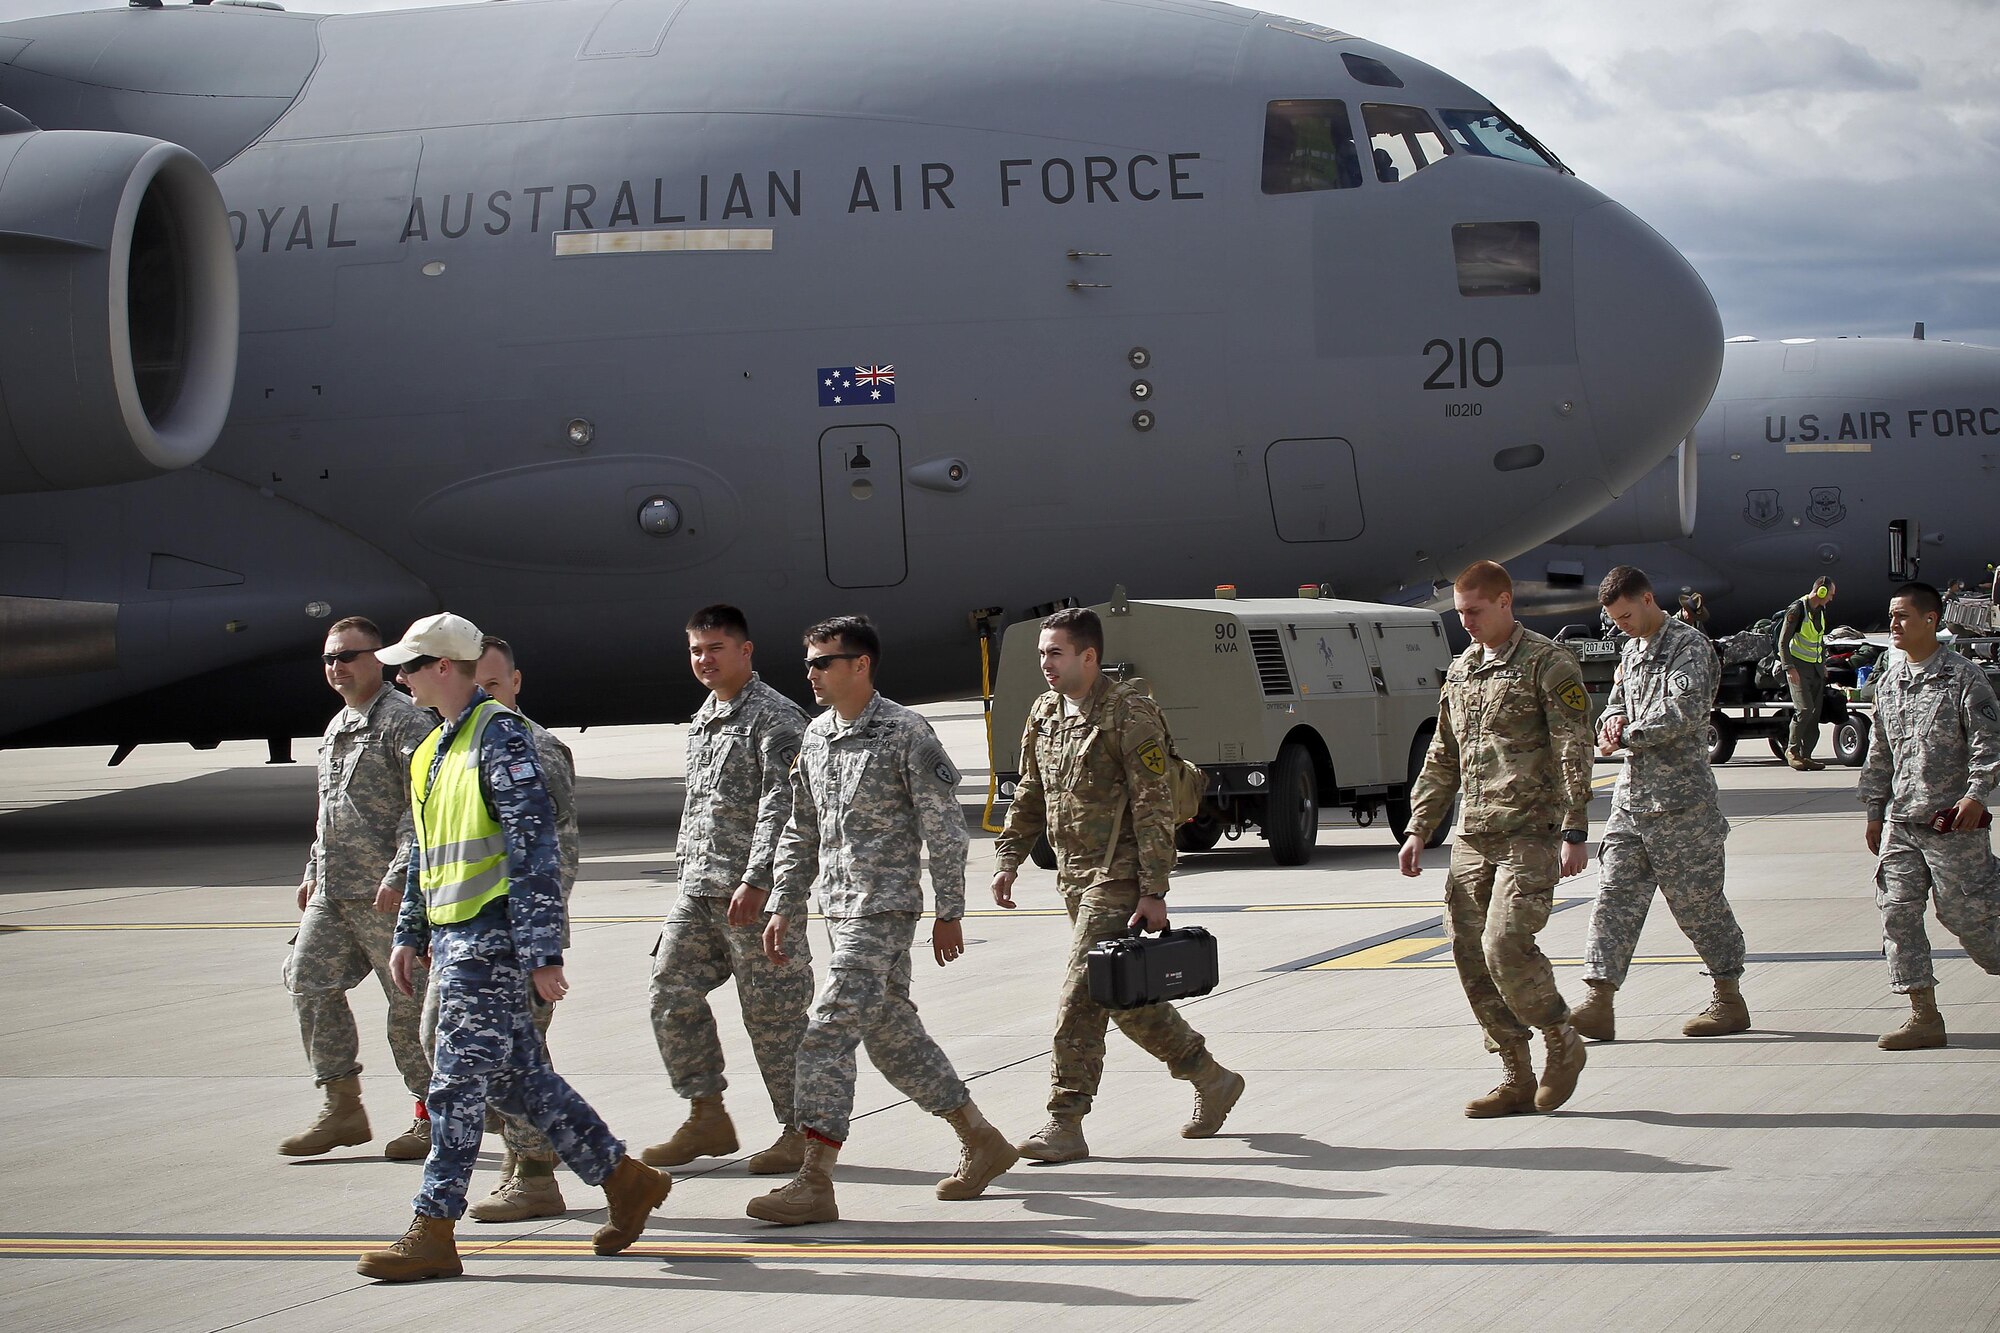 Royal Australian Air Force members accompany U.S. military members off the flight line at RAAF Amberley, Australia, after a personnel drop exercise during Talisman Sabre 2015, July 8, 2015. (Royal Australian Air Force photo by Cpl. Peter Borys/Released)